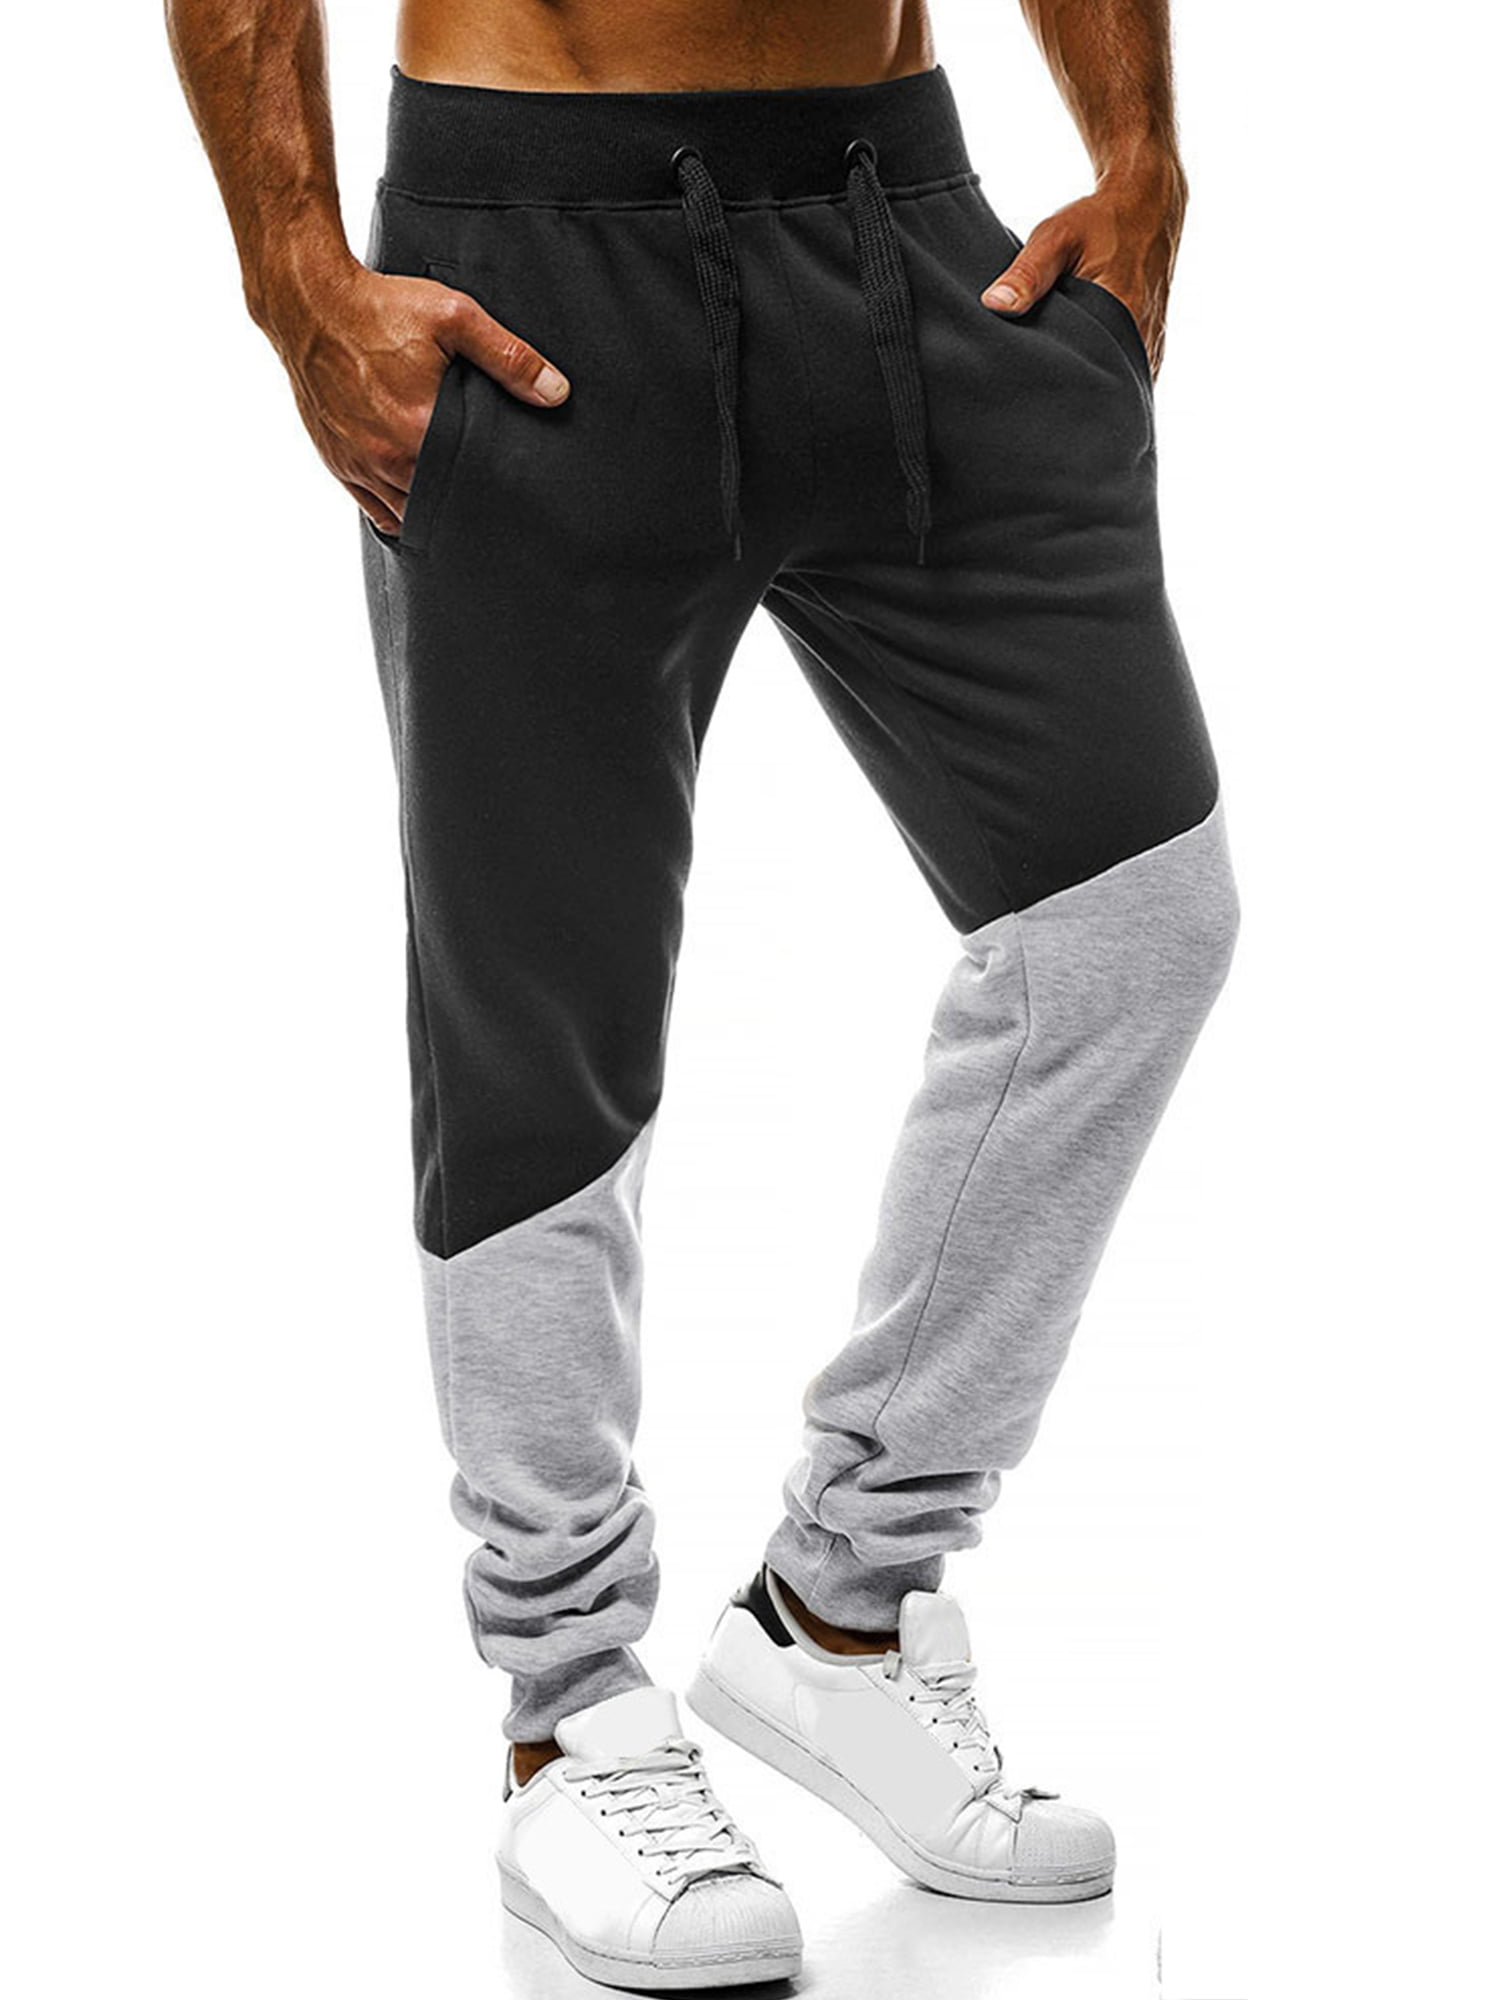 Private Bath Customiz Youth Kids Sweatpants New 100 Dollar Bill Boys Girls 3D Casual Active Sports Joggers Pants Trousers